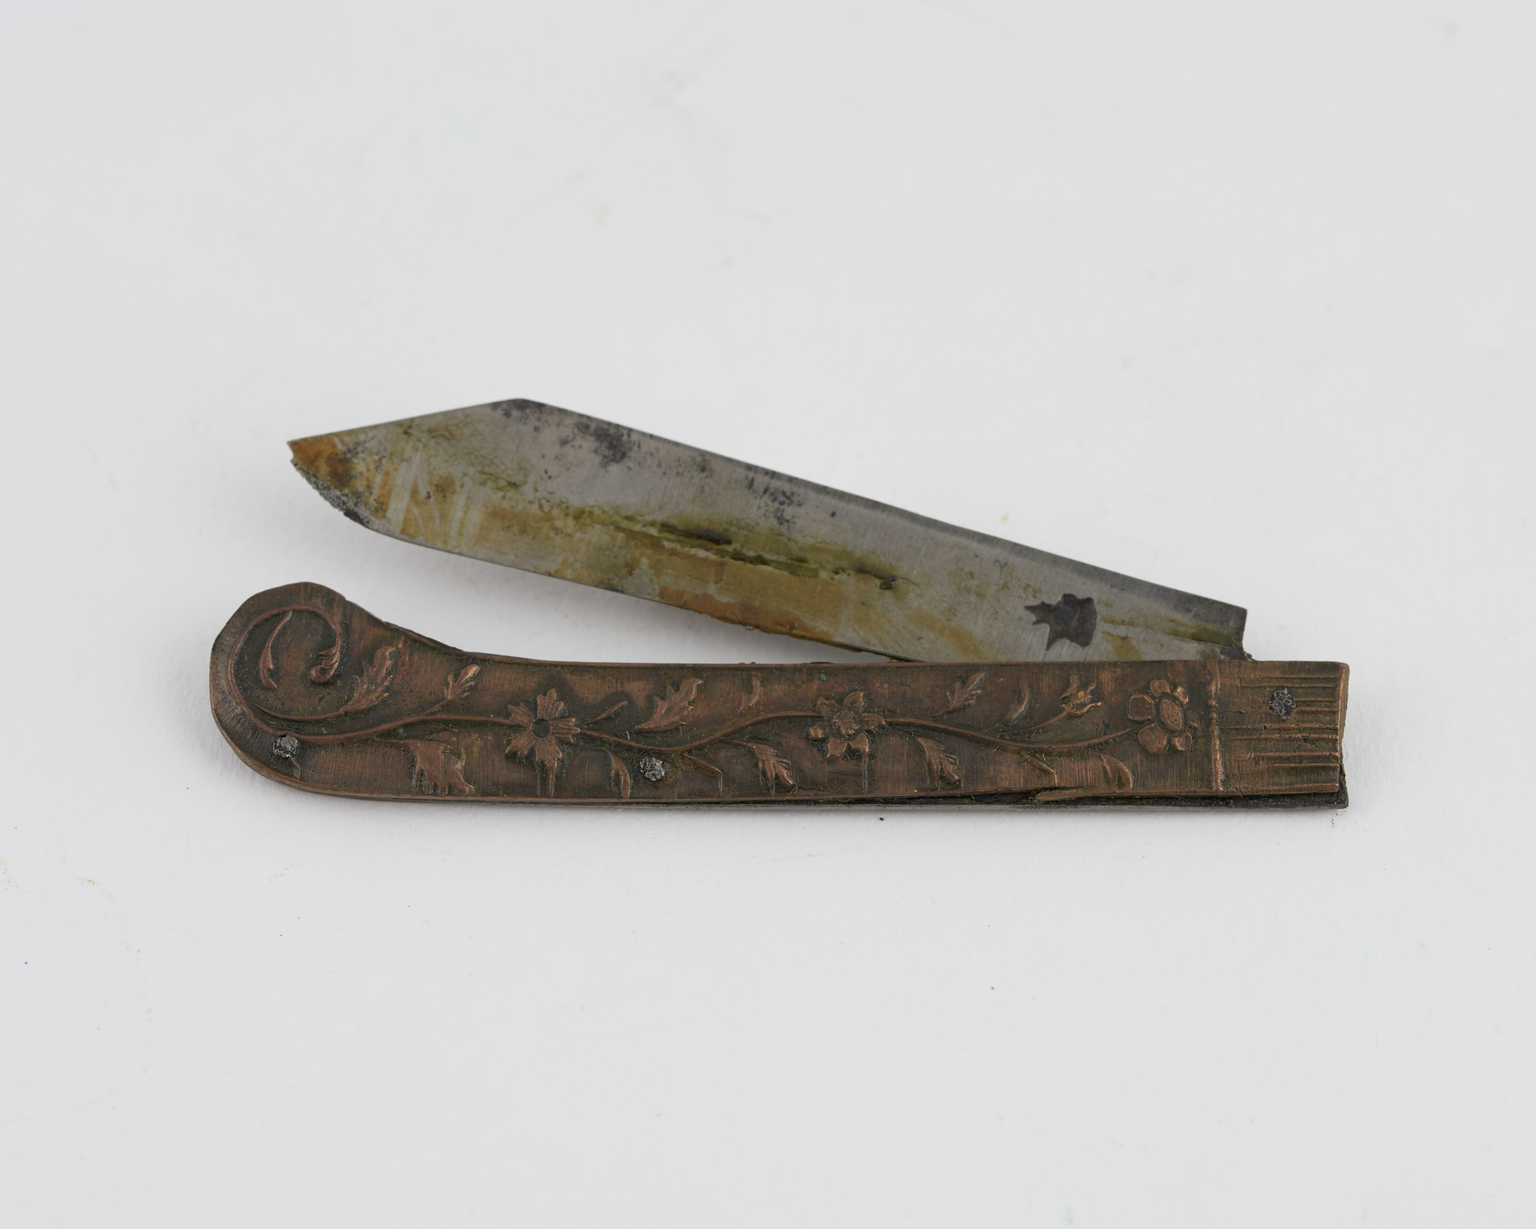 A penknife made around 1700 by Benjamin Withers, Master Cutler in Sheffield.